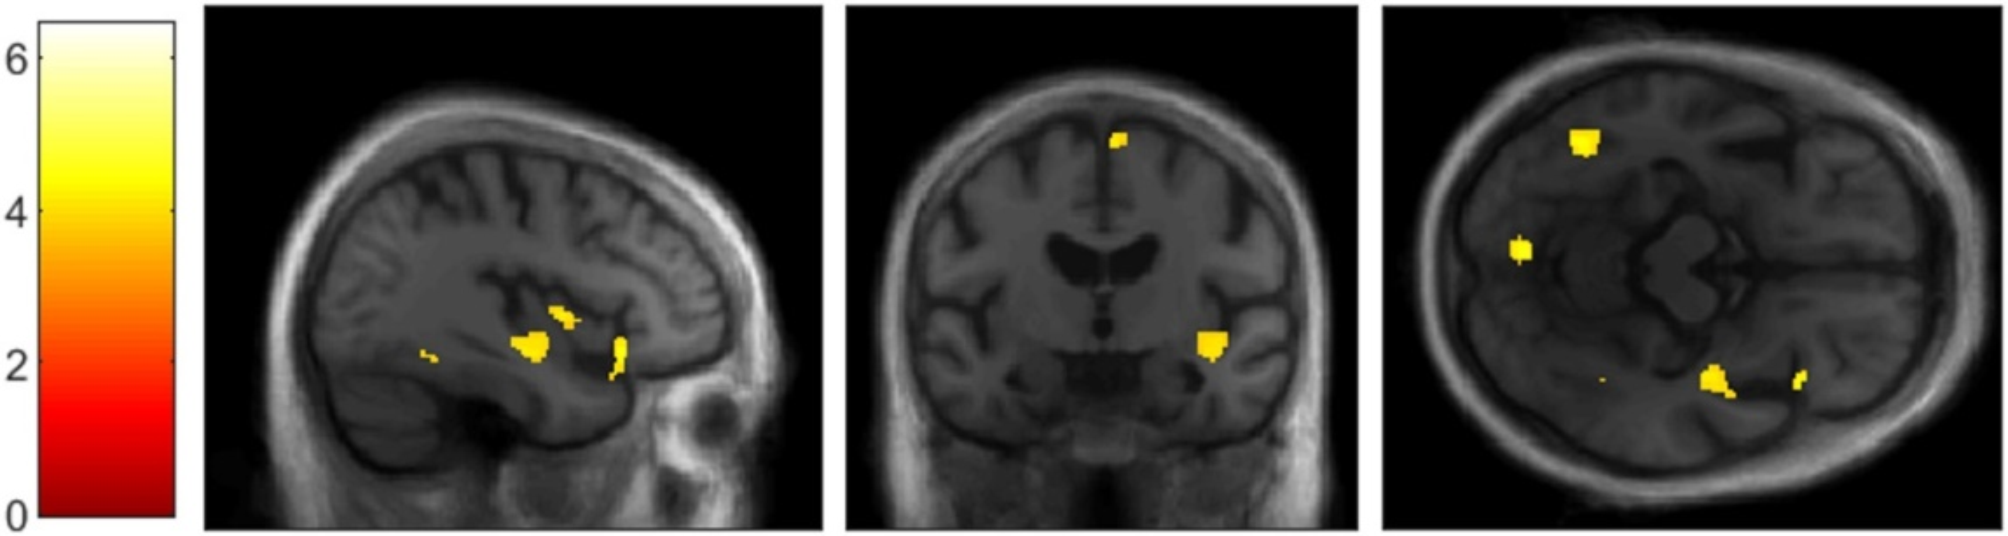 Who am I with my Lewy bodies? The insula as a core region of the self-concept networks